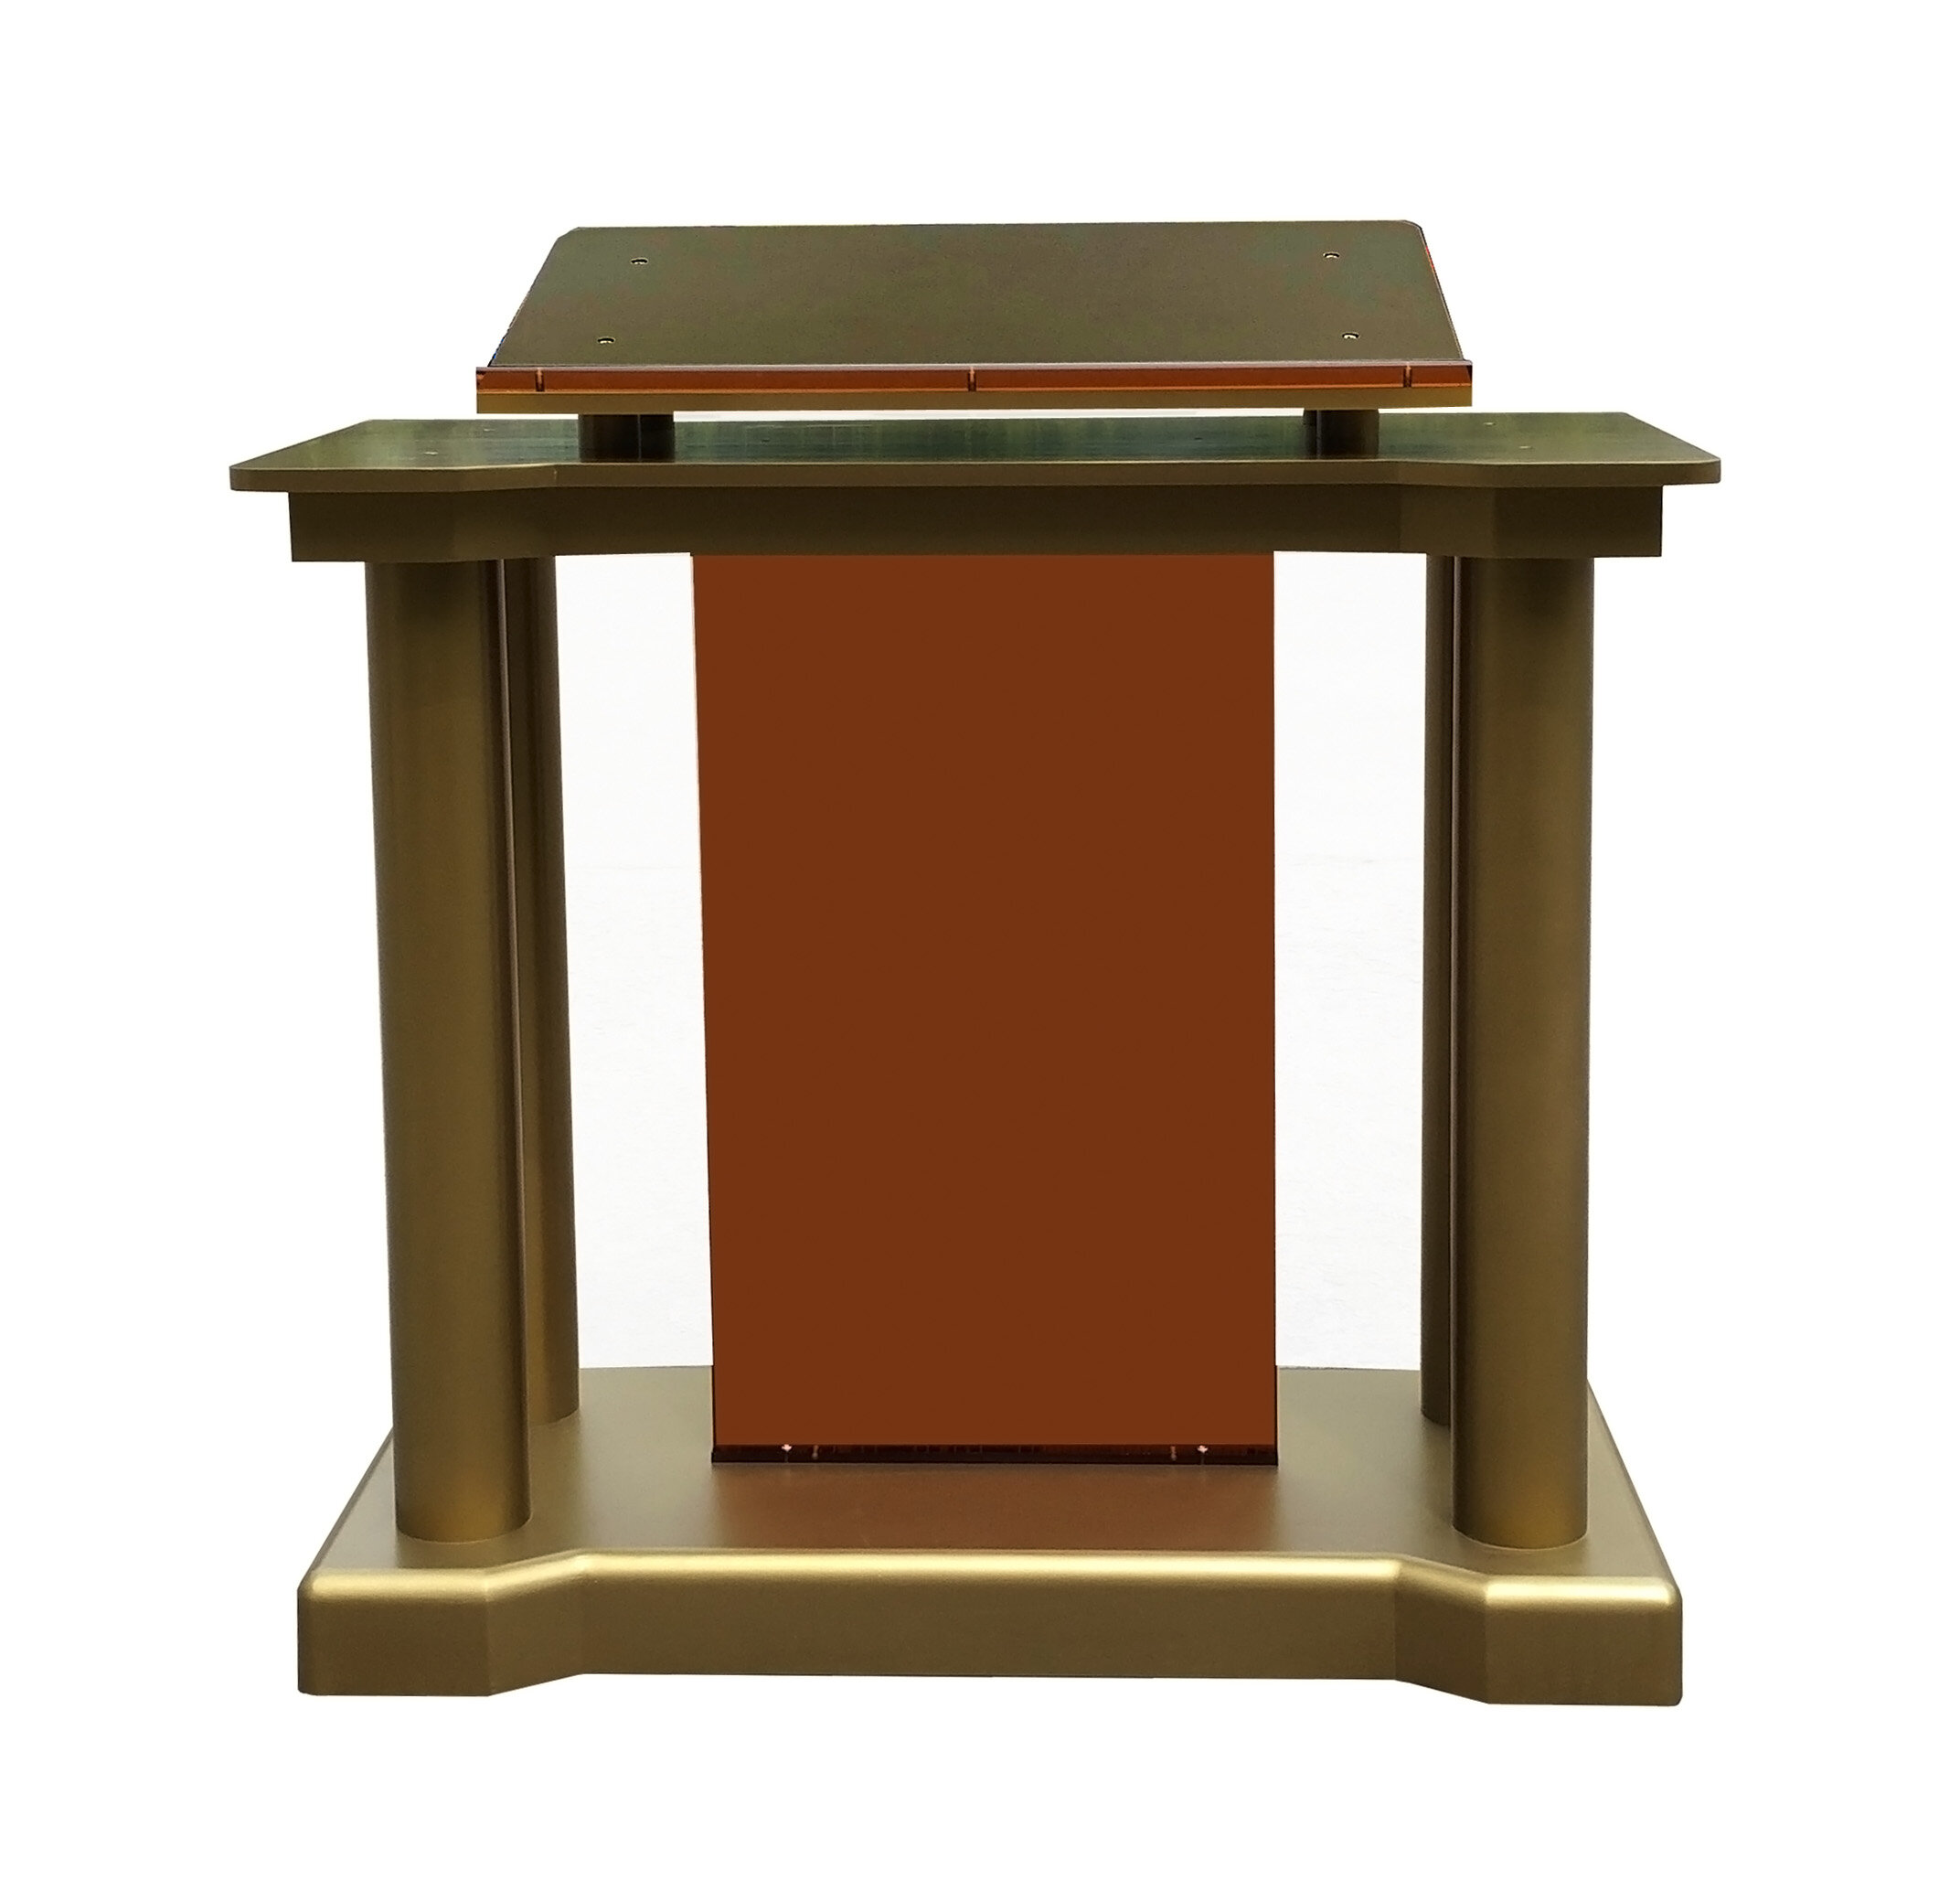 FixtureDisplays Deluxe Podium Floor Standing Lectern Church Pulpit w/Elevated Reading Surface 14315-GOLD